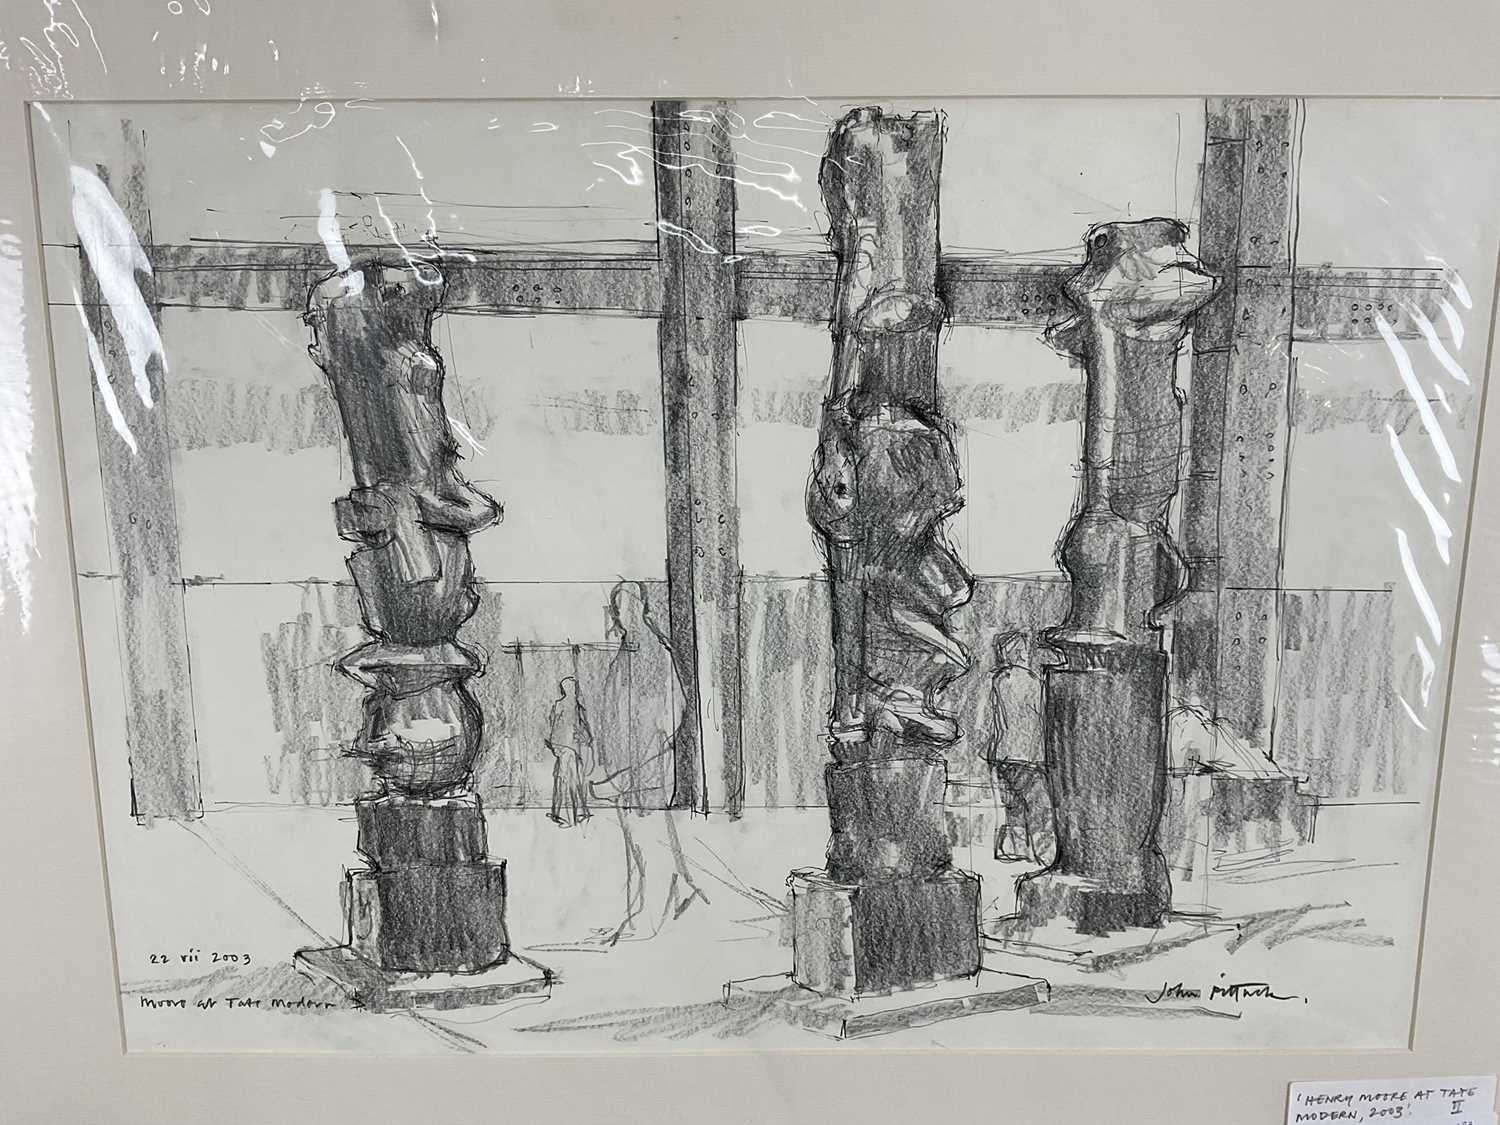 Group of works by John Pittuck (1938-2005)